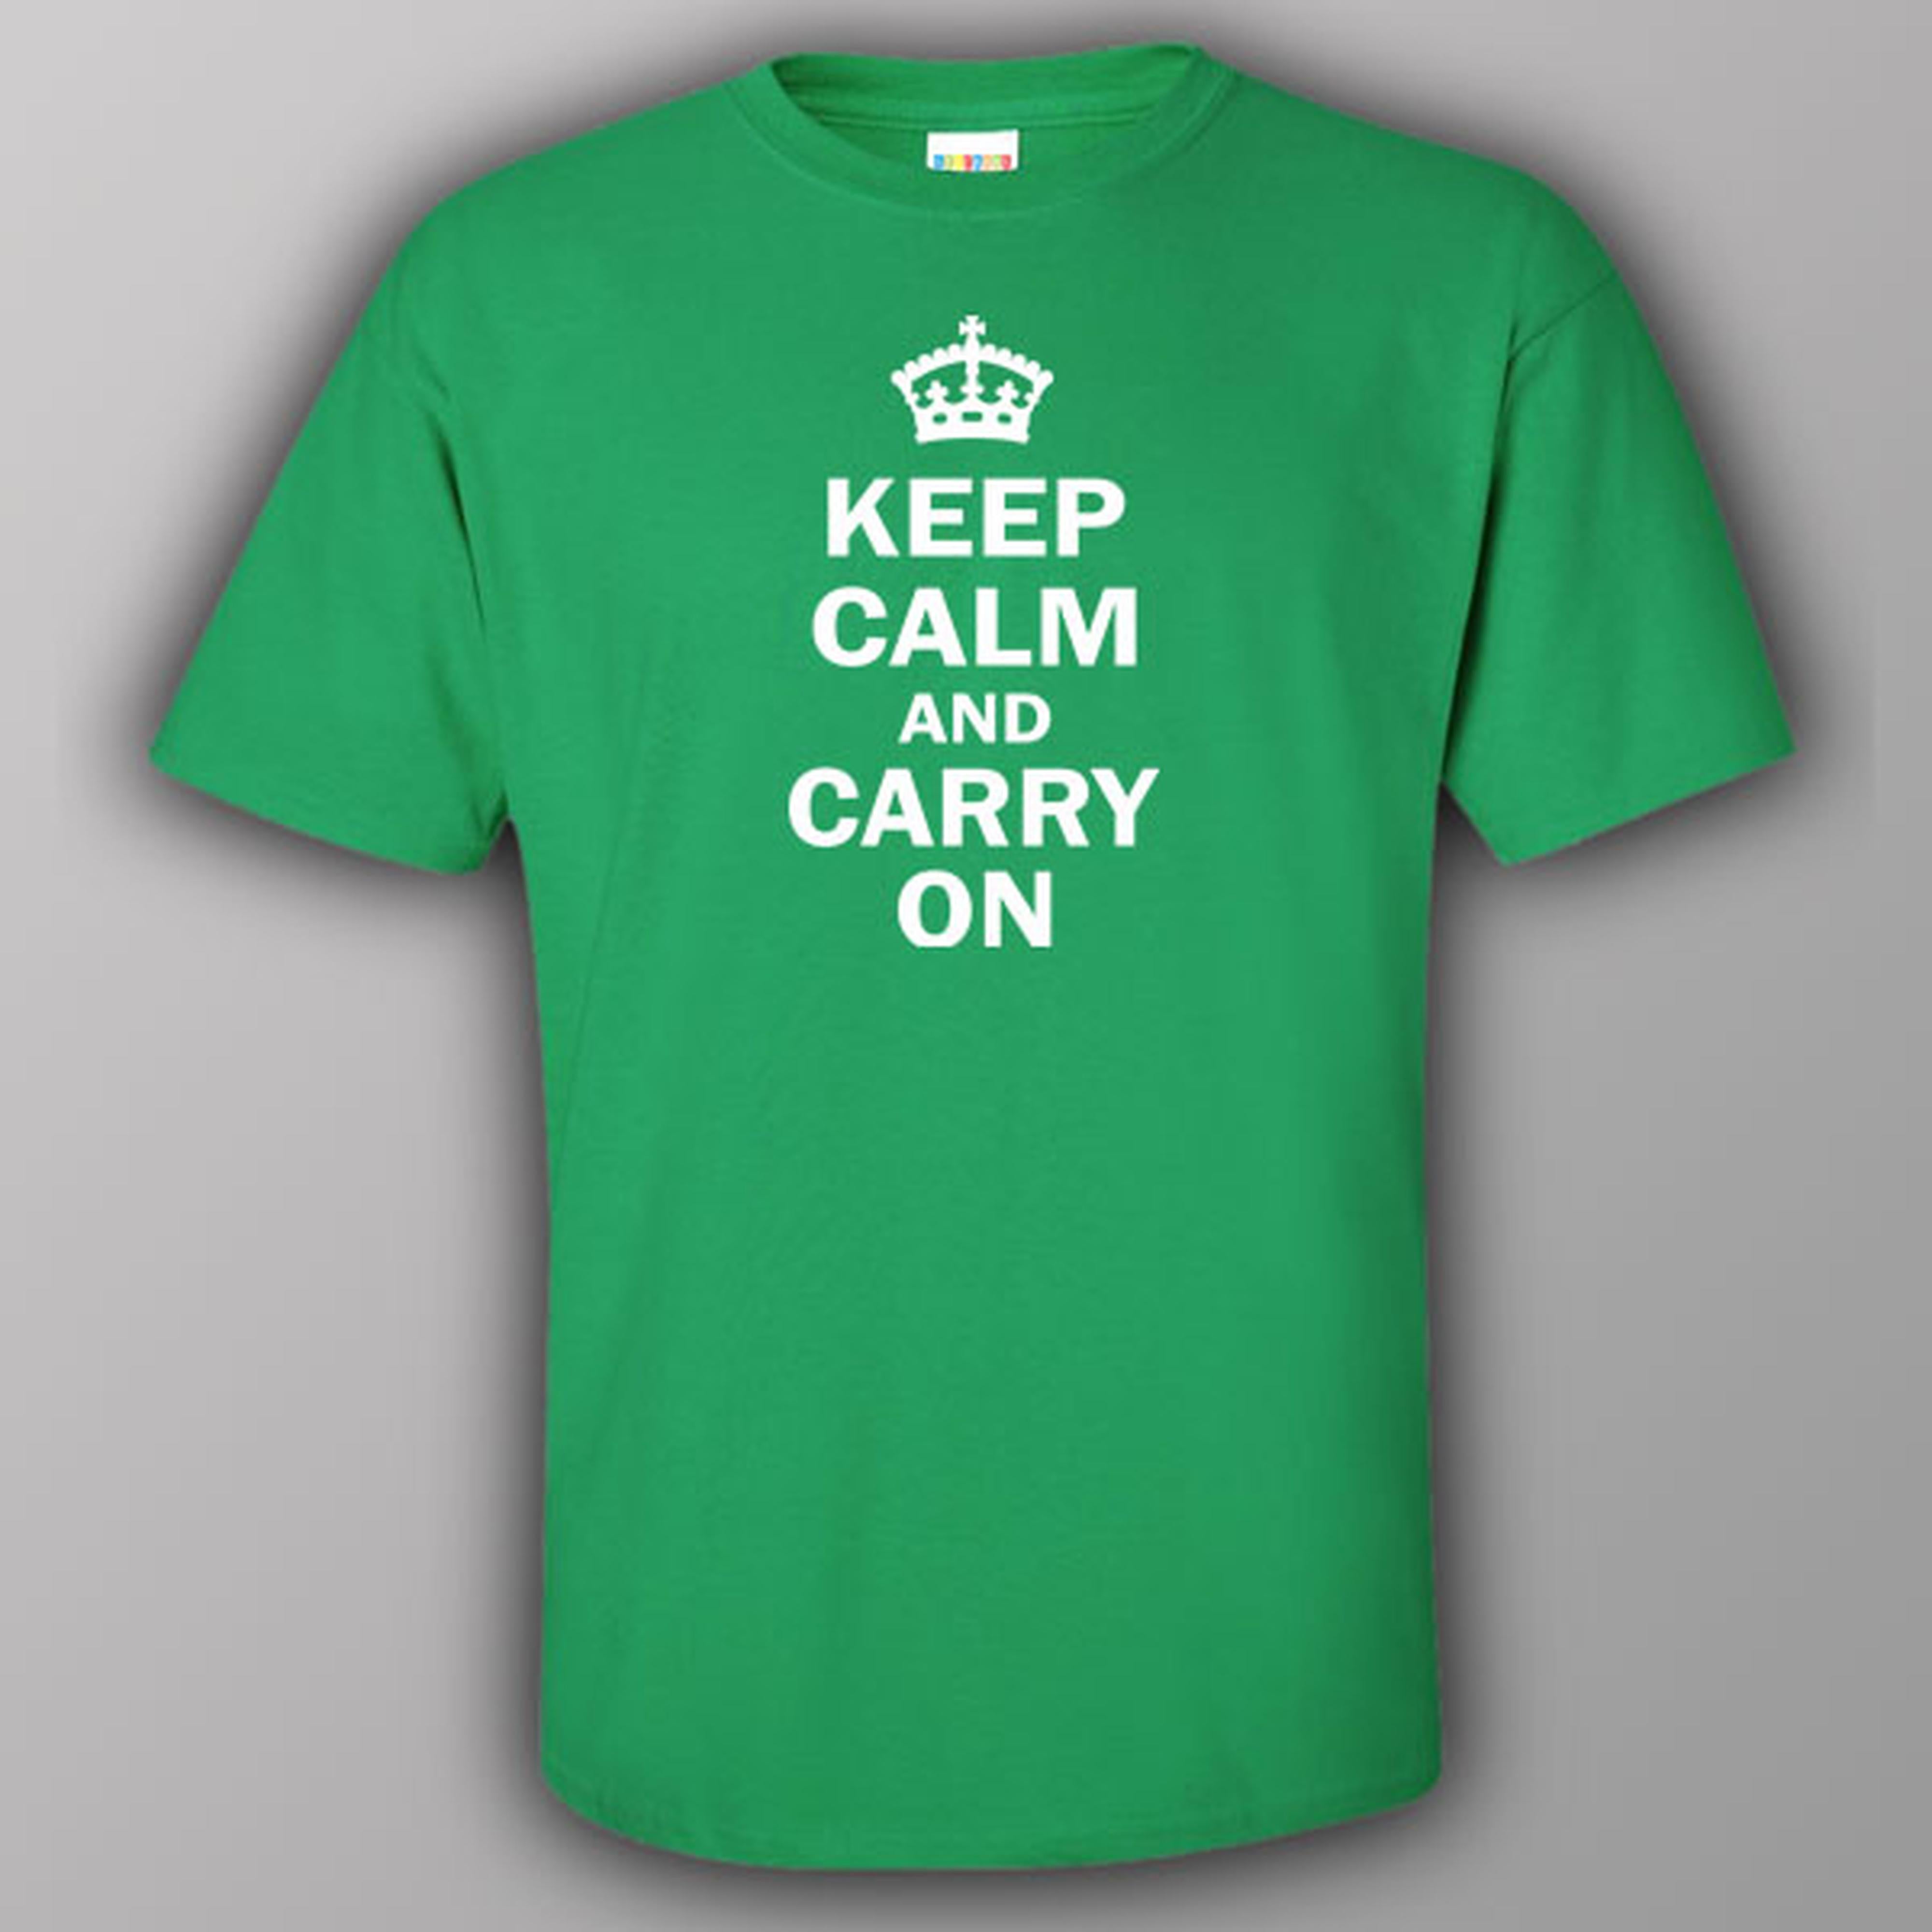 Keep calm and carry on - T-shirt